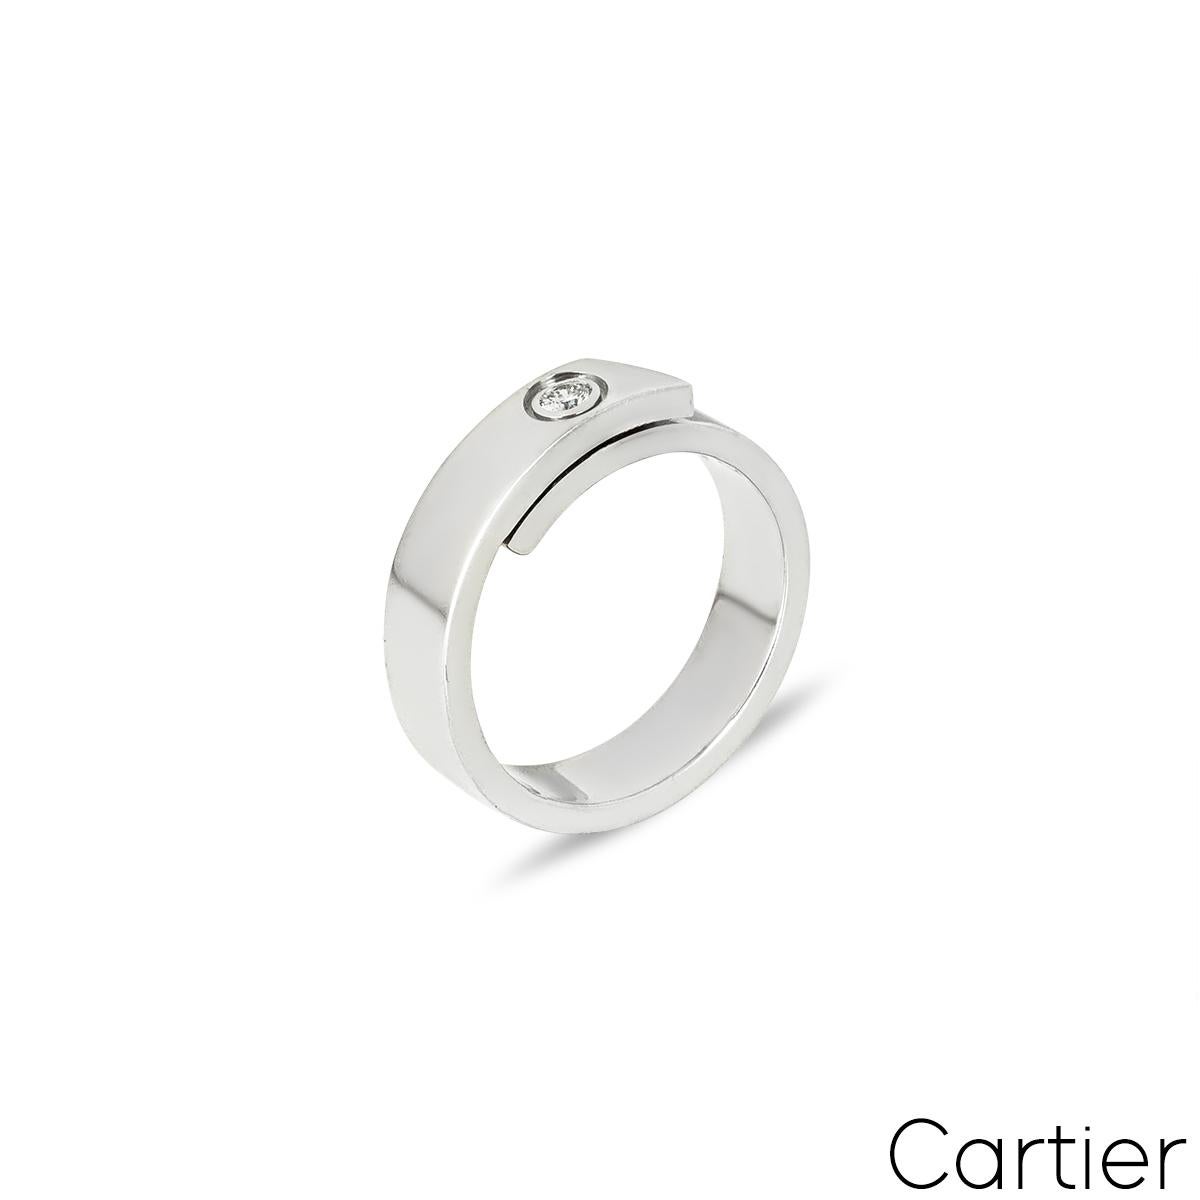 A lovely 18k white gold Cartier diamond ring from the Anniversary collection. The ring comprises of a 5.5mm band overlapping at the centre with a single round brilliant cut diamond, approximately 0.09ct in a rubover setting. The ring is a size UK S